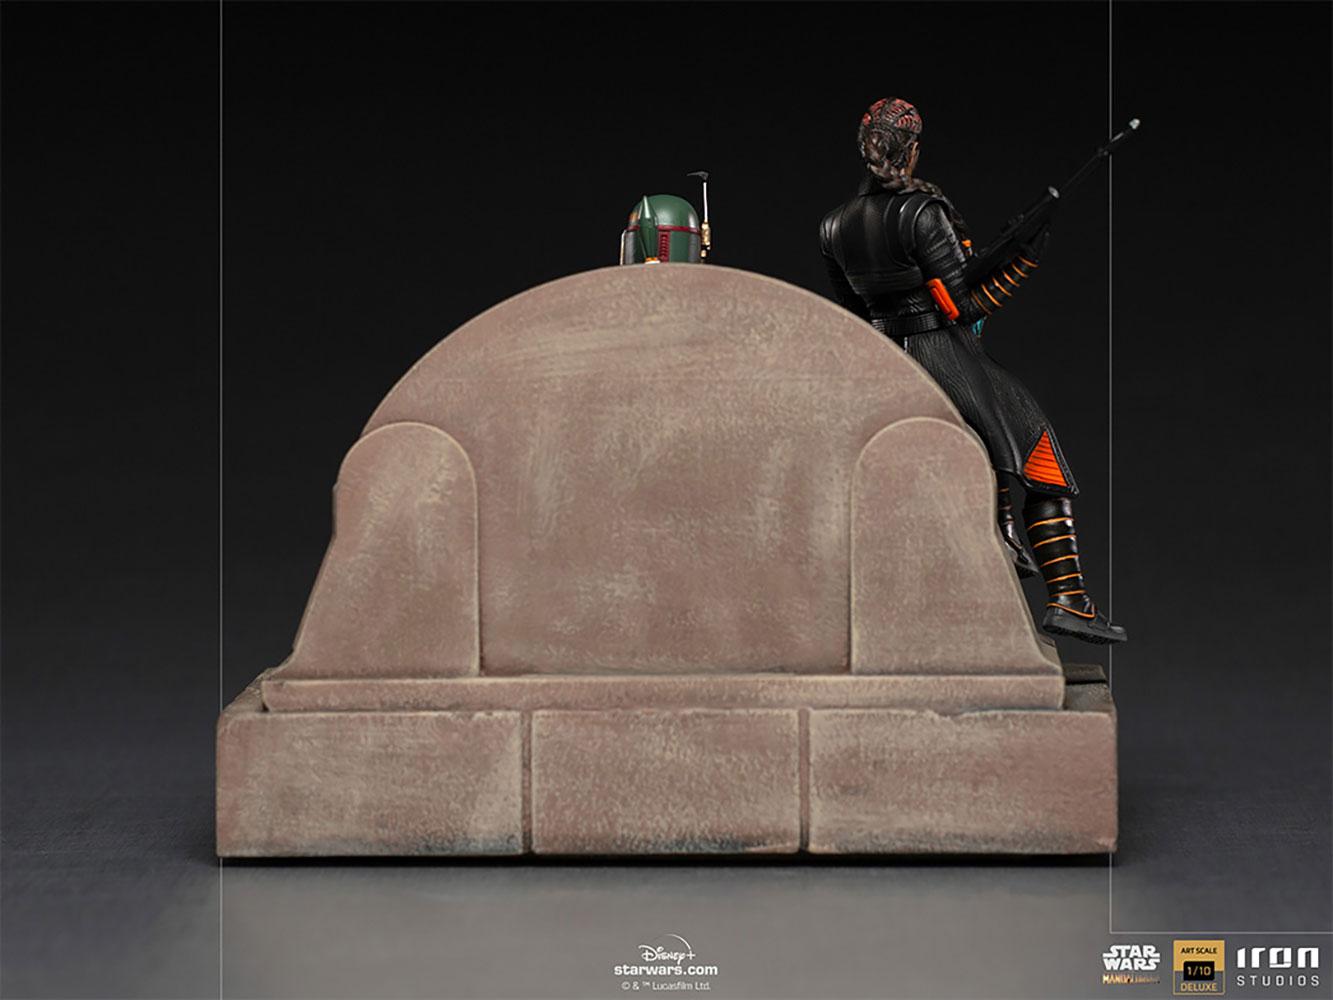 Star wars iron studios the mandalorian boba fett and fennec shand on throne deluxe2